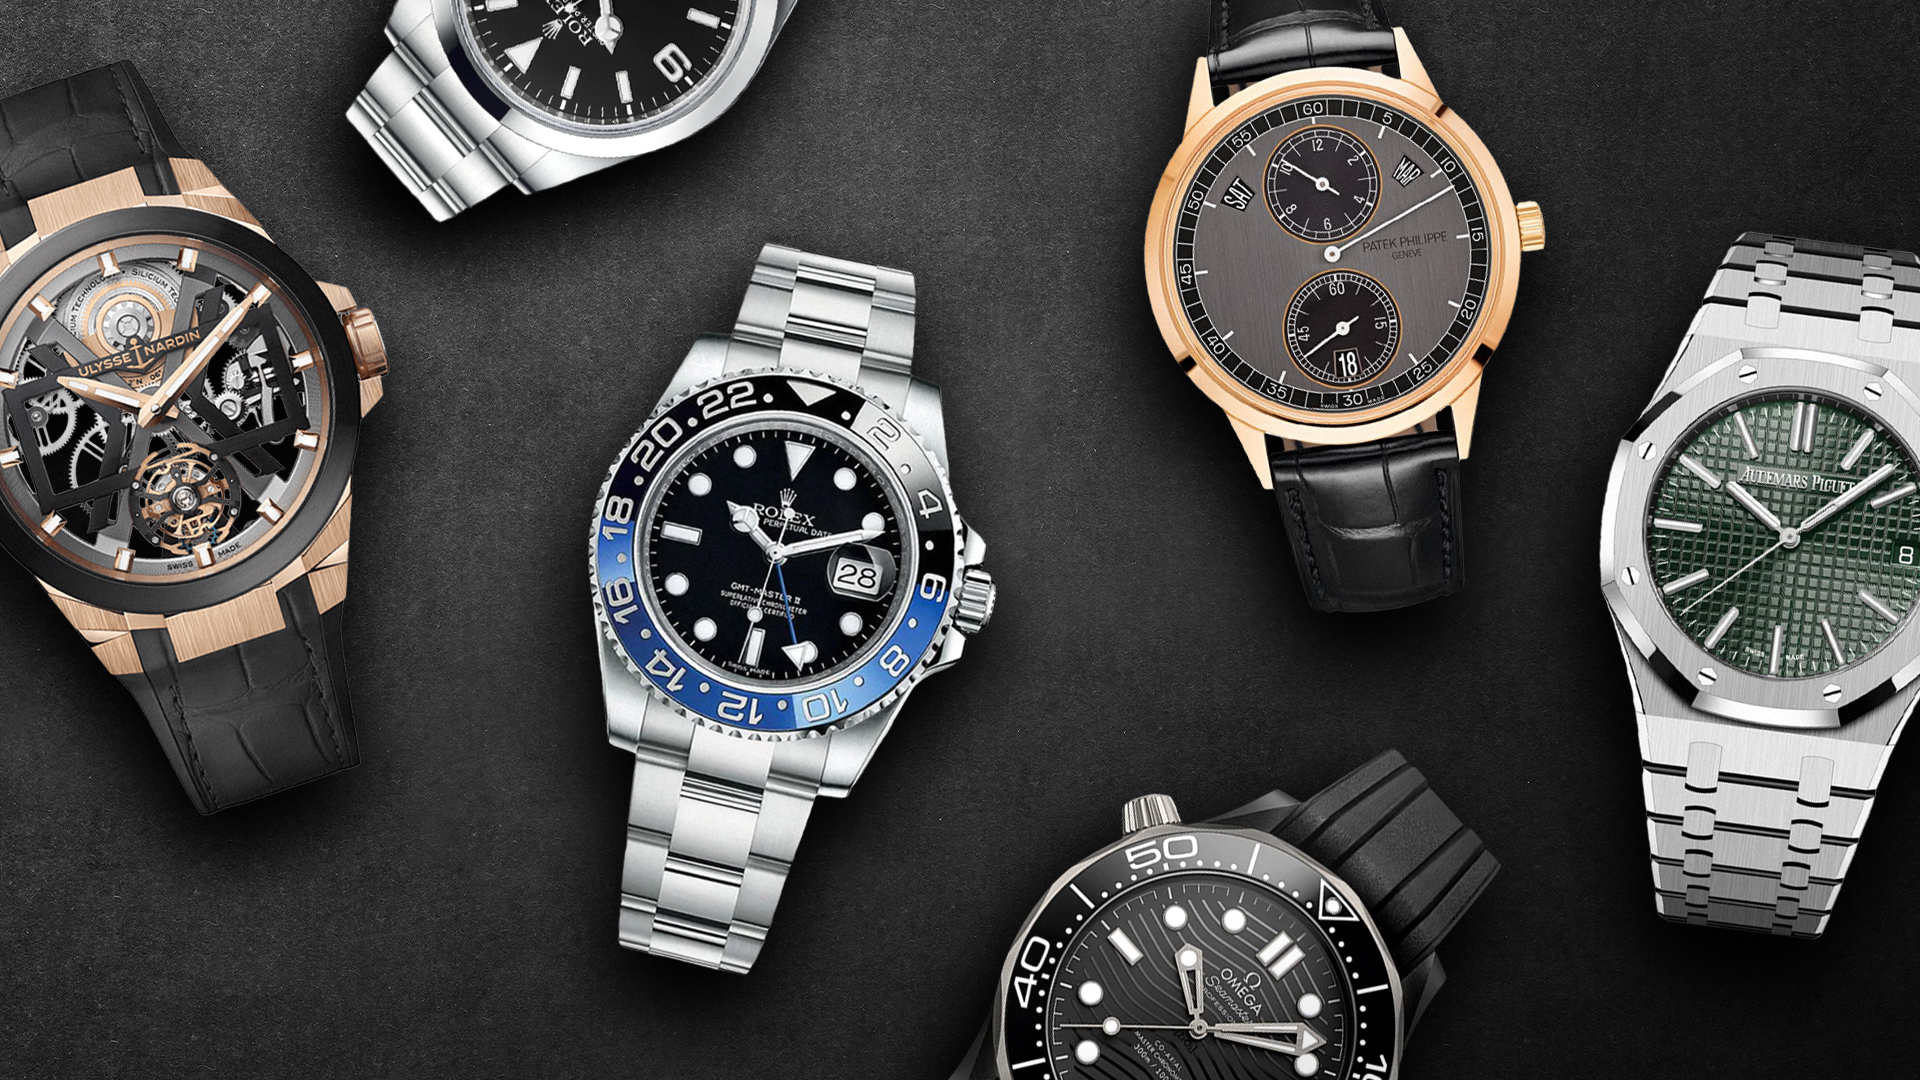 Indians snap up Swiss luxury watches in H1 | Mint-sonthuy.vn